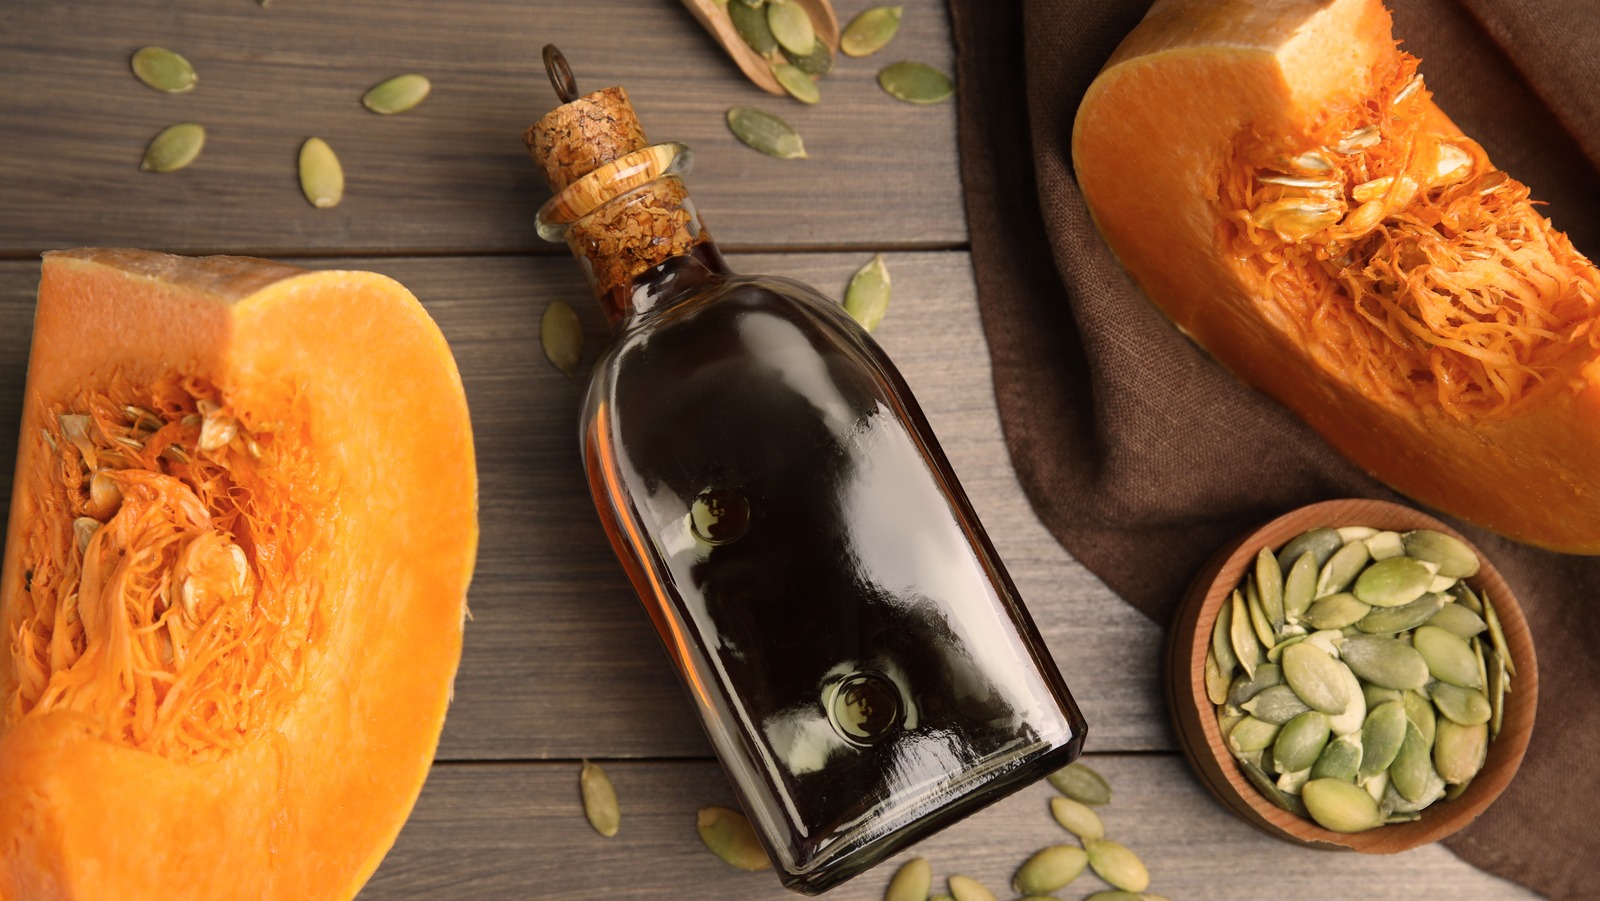 Pumpkin Seed Oil Is The No-Cook Ingredient For Enhancing Dishes